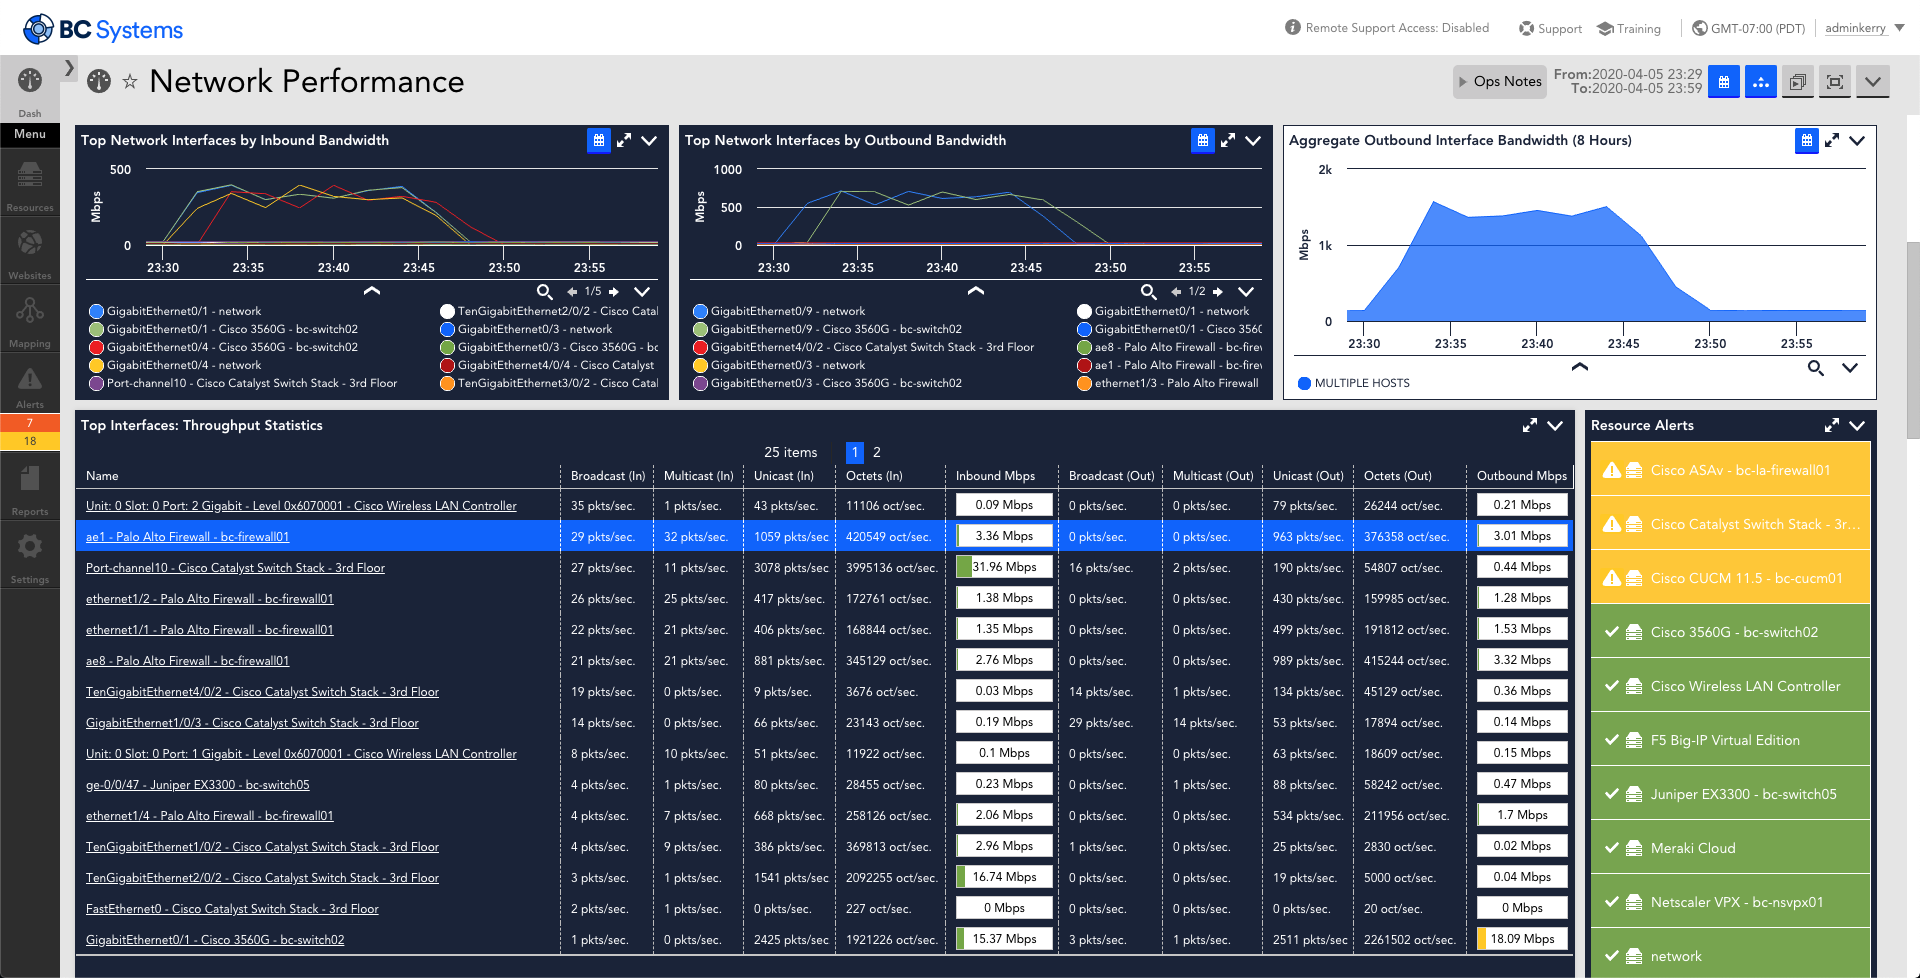 This dashboard provides an a listing of various metrics that are monitored for Network Performance. The metrics displayed are interface inbound bandwidth over time, interface outbound bandwidth over time, real-time interface statistics, status